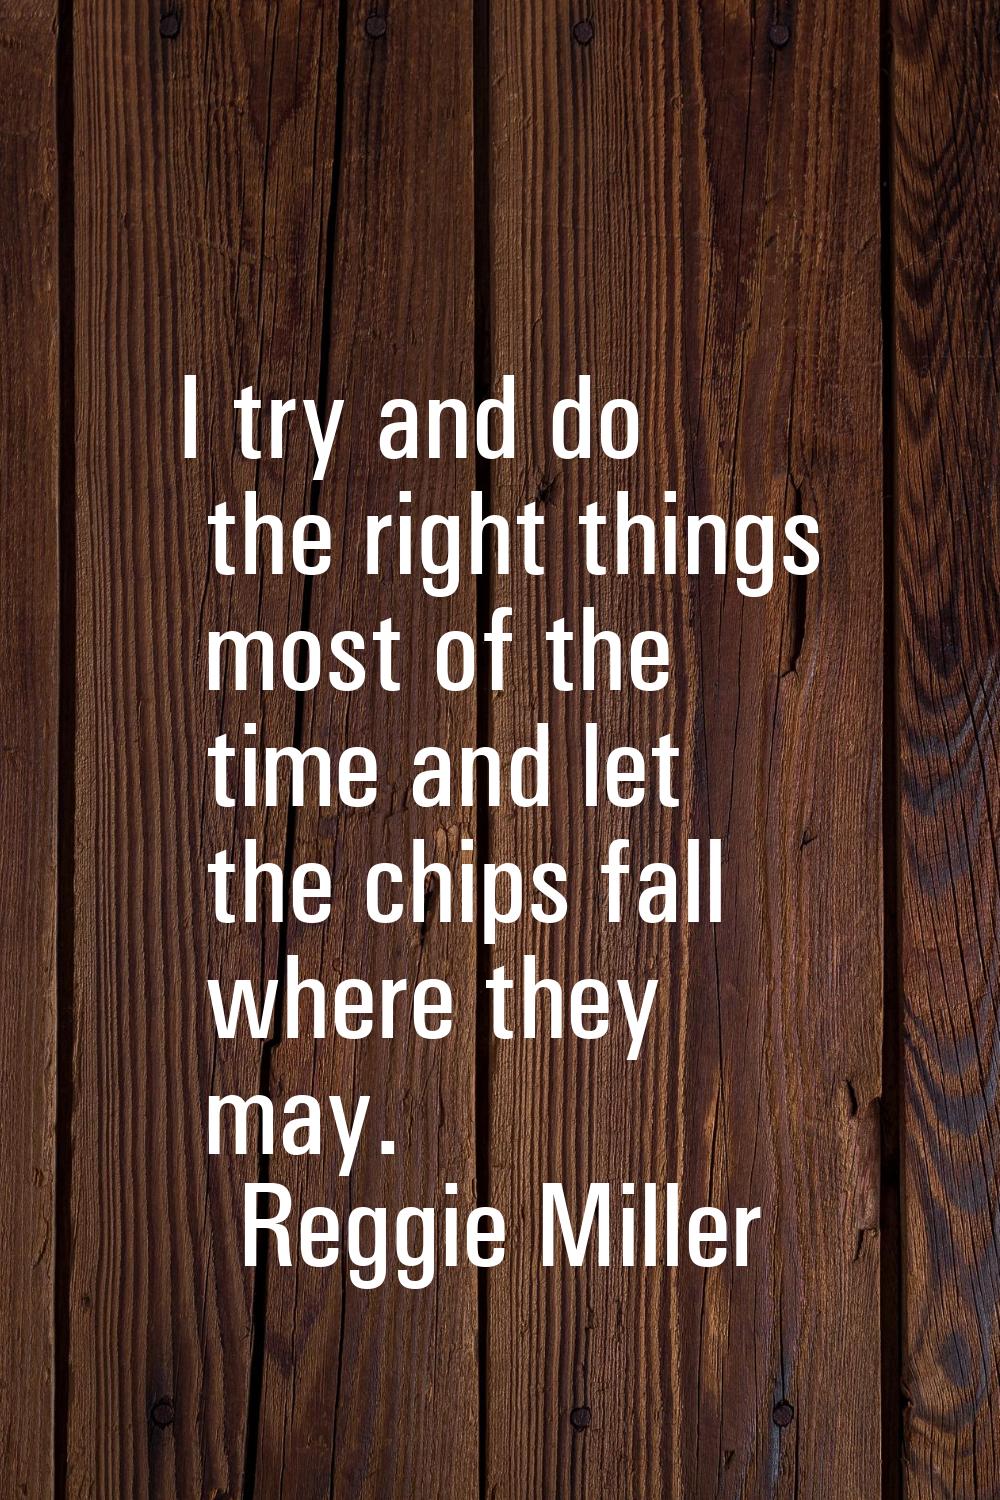 I try and do the right things most of the time and let the chips fall where they may.